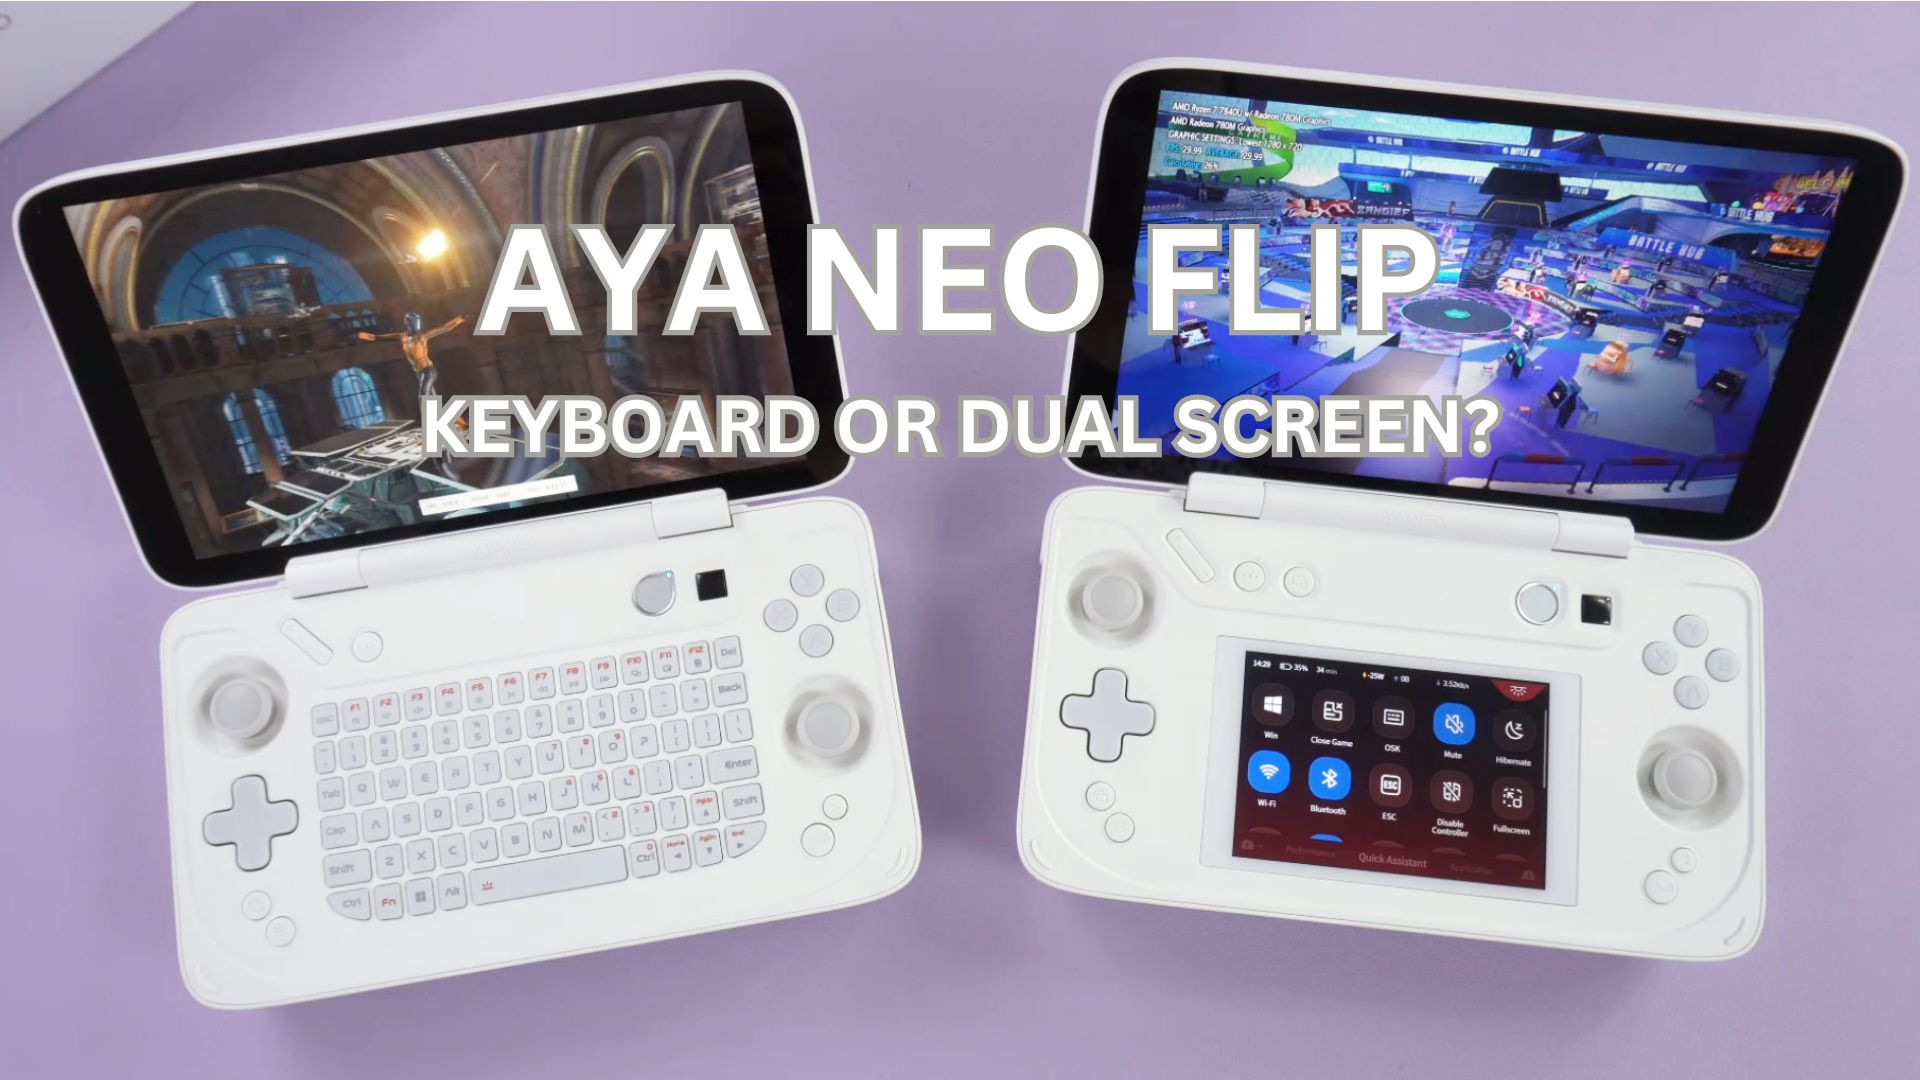 AYANEO Flip Review with video – Awesome Keyboard or Dual Screen handheld gaming PC